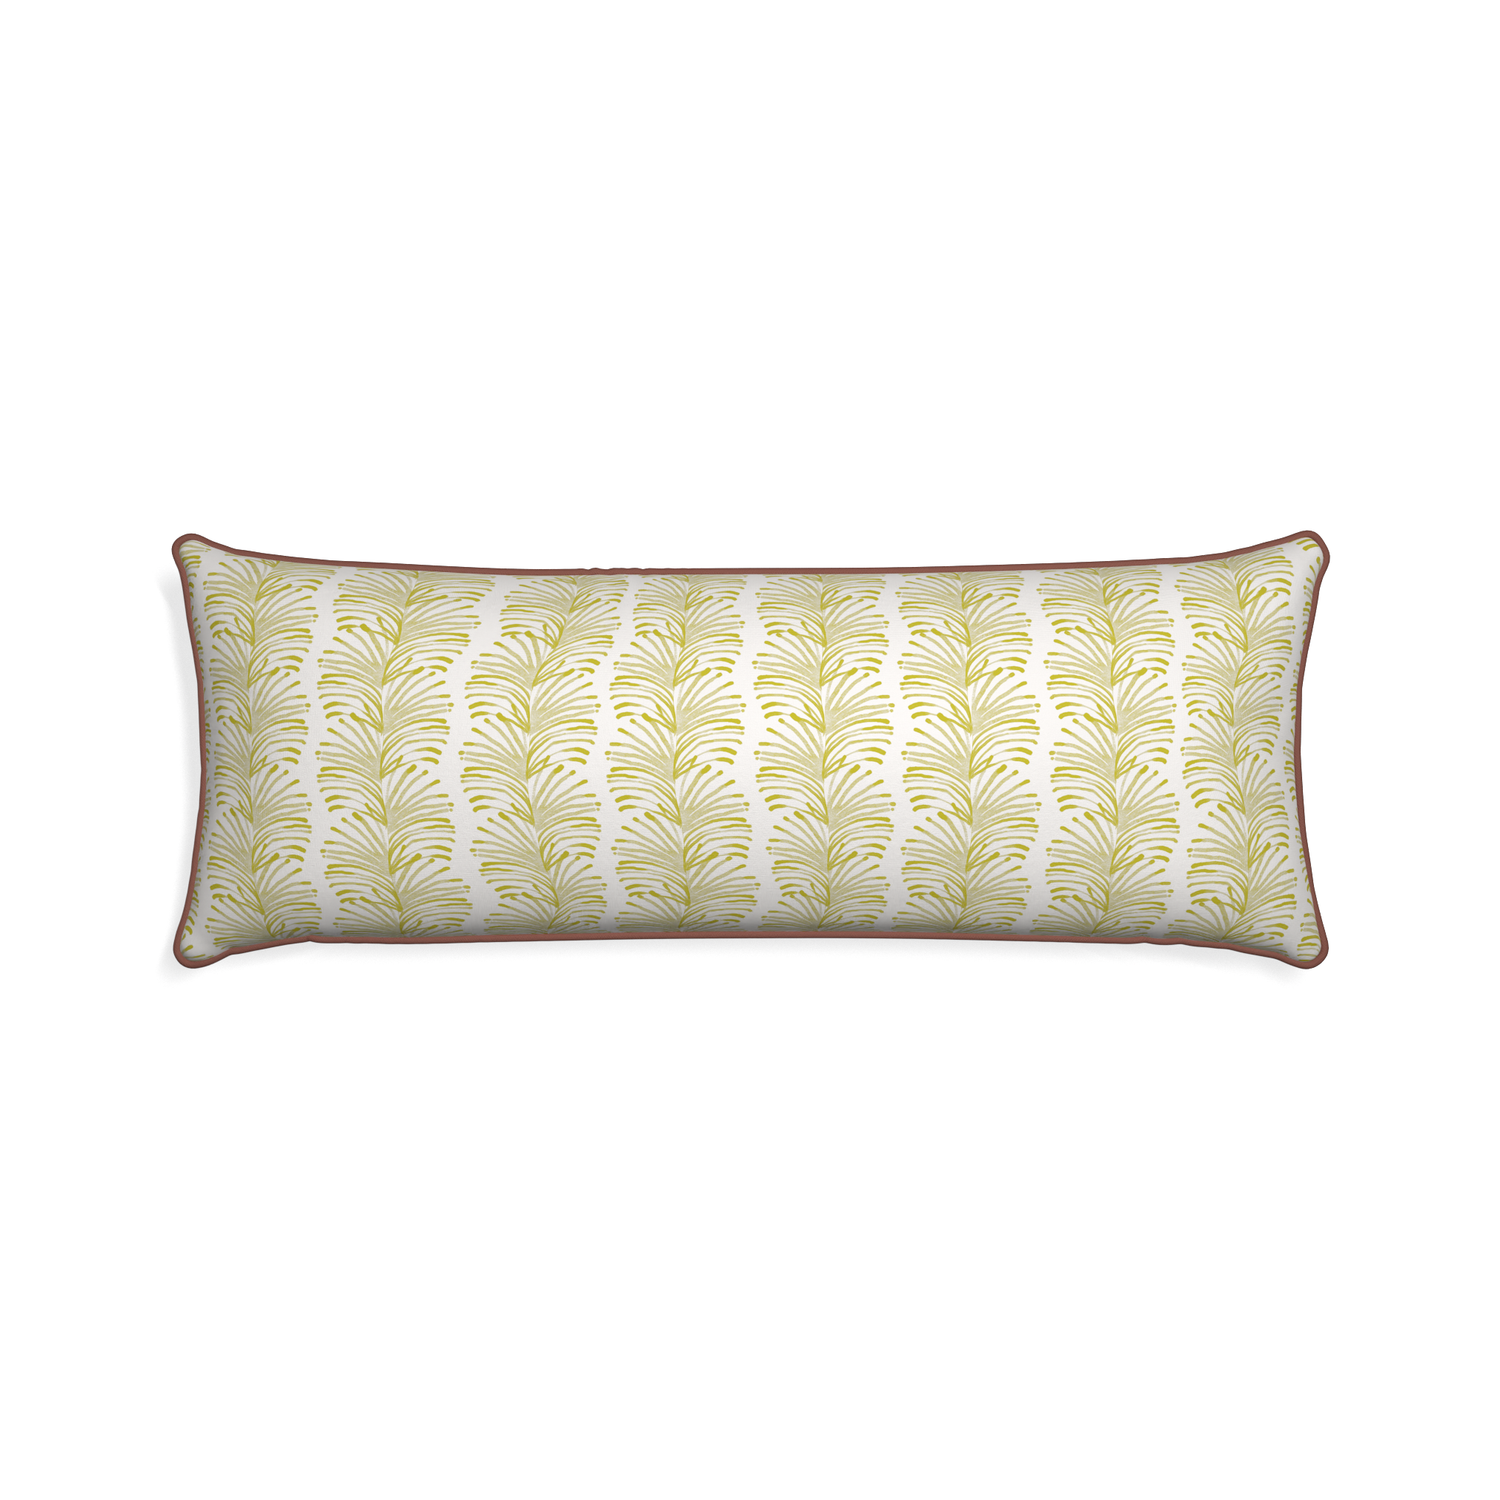 Xl-lumbar emma chartreuse custom yellow stripe chartreusepillow with w piping on white background